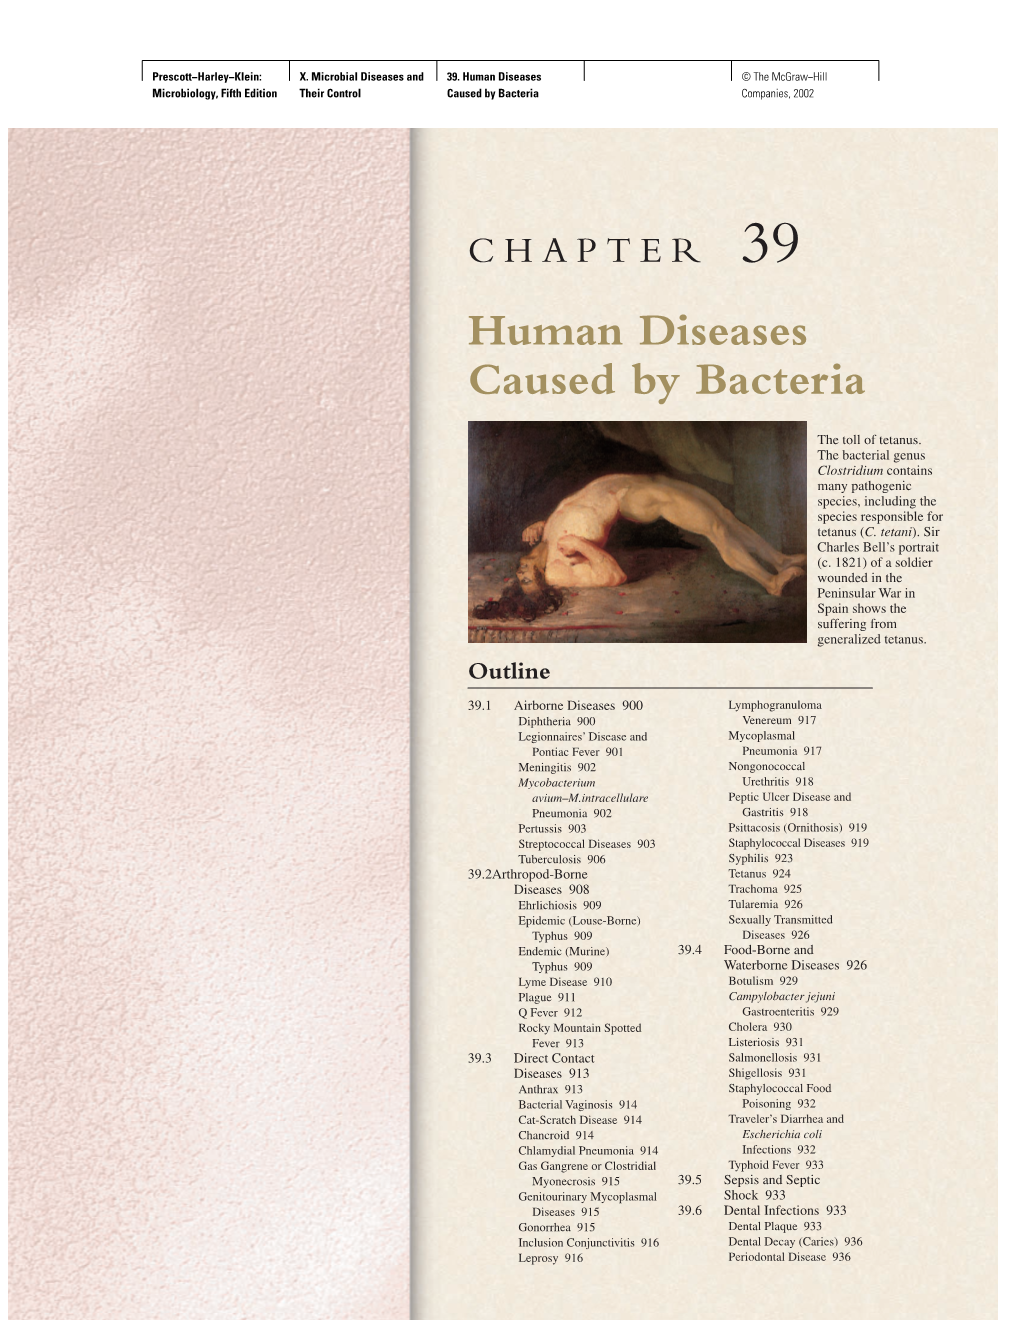 Human Diseases Caused by Bacteria